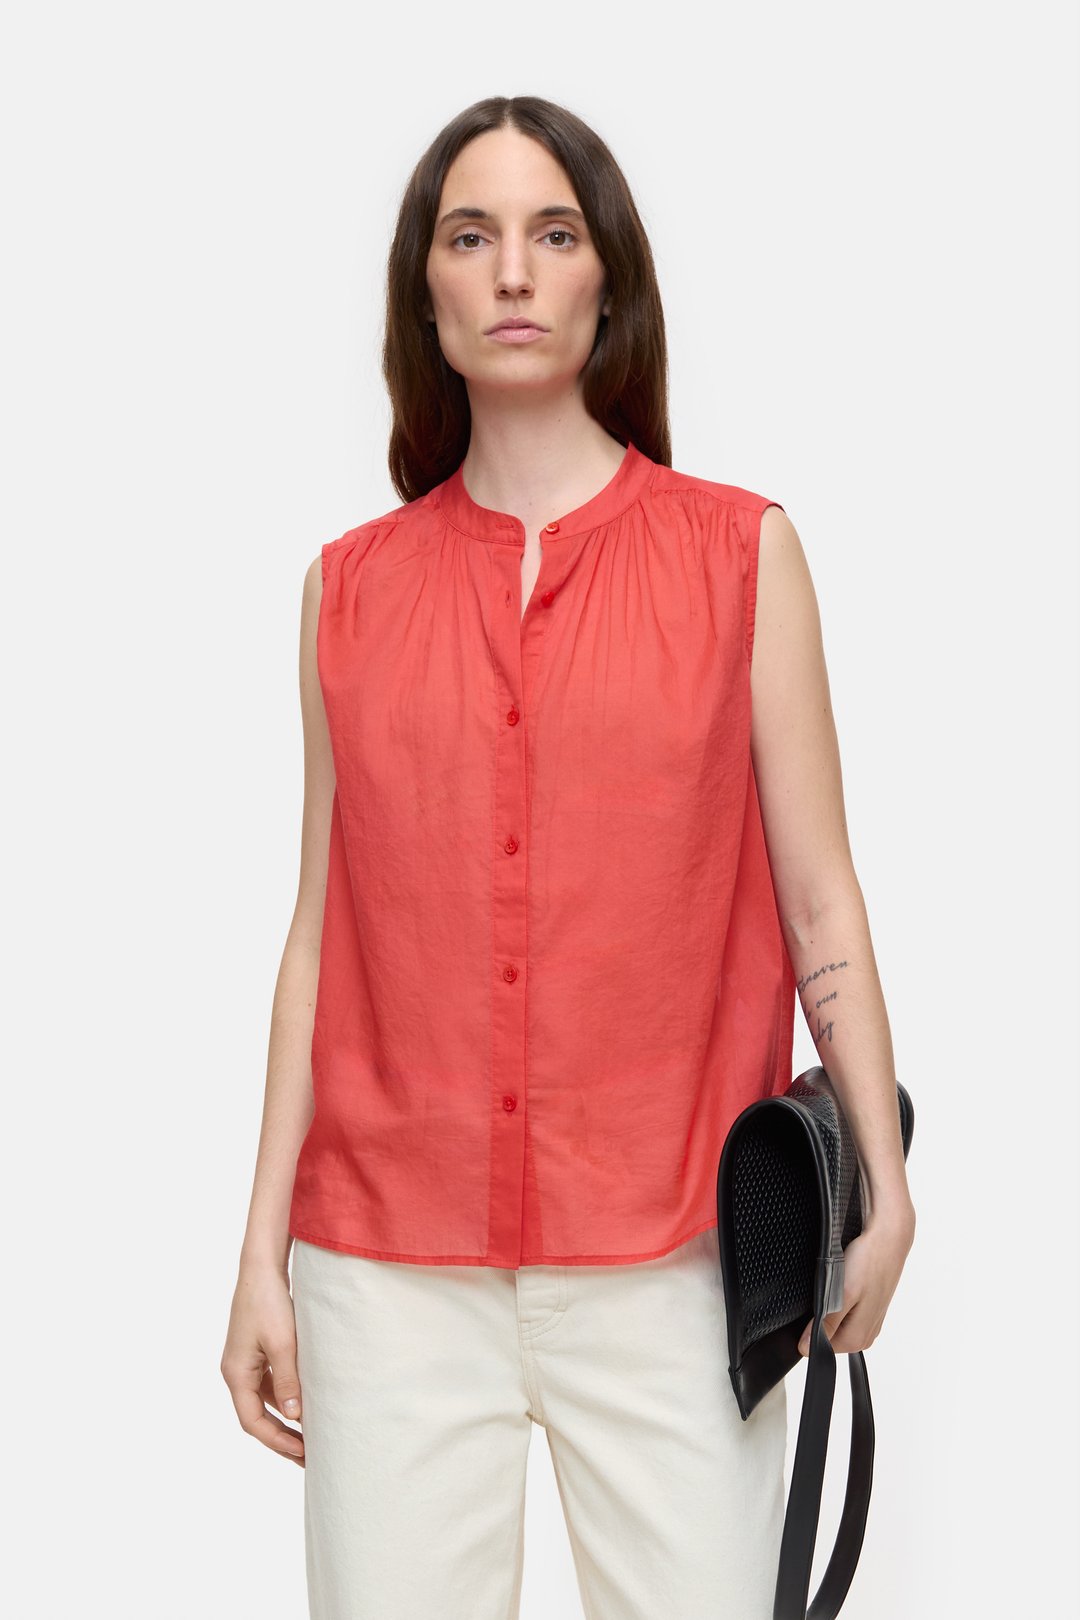 CLOSED COTTON VOILE SLEEVELESS BLOUSE